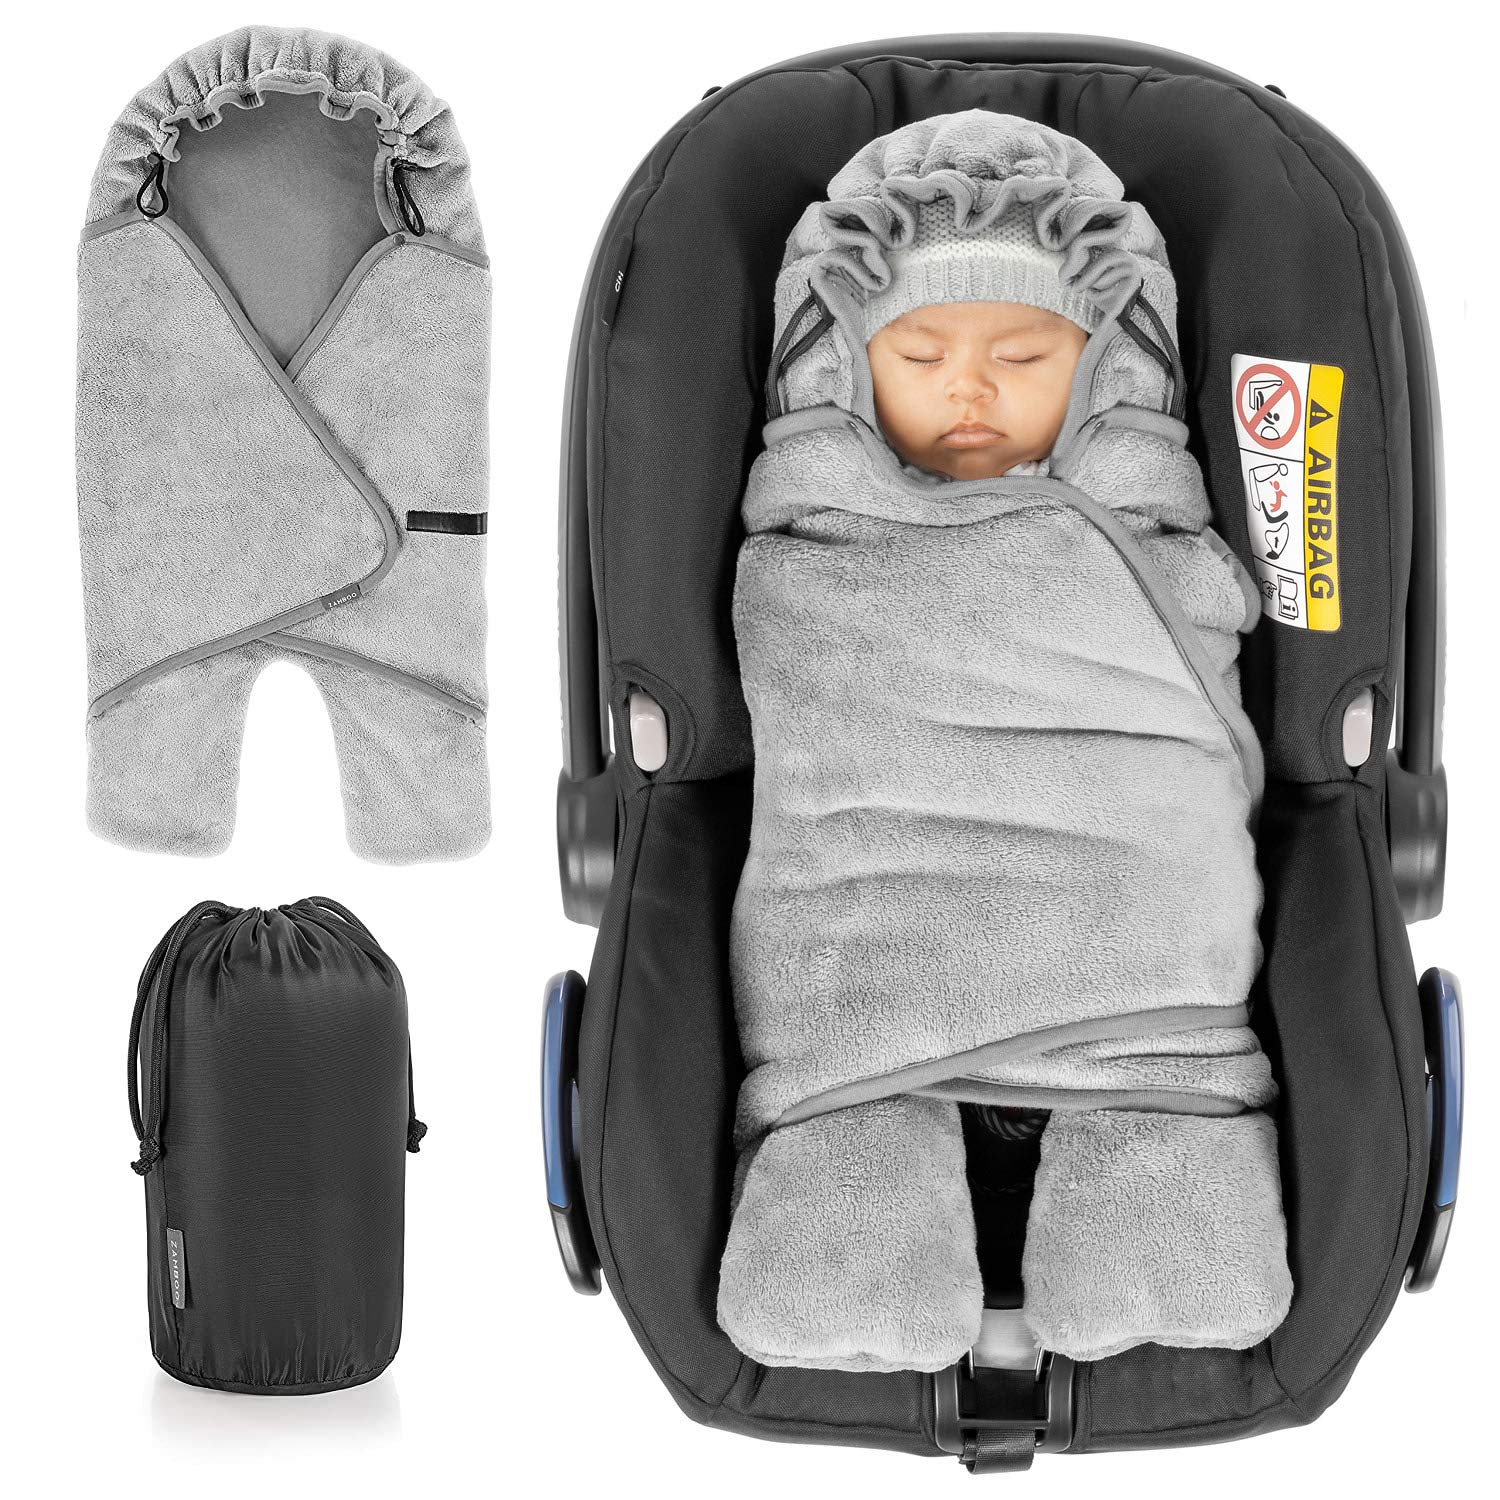 Zamboo Baby Swaddling Blanket with Feet - Winter - Lined Blanket for Baby Seats / Car Seats (Fits Maxi-Cosi, Cybex, Römer) and Pushchairs with Hood and Bag - Grey